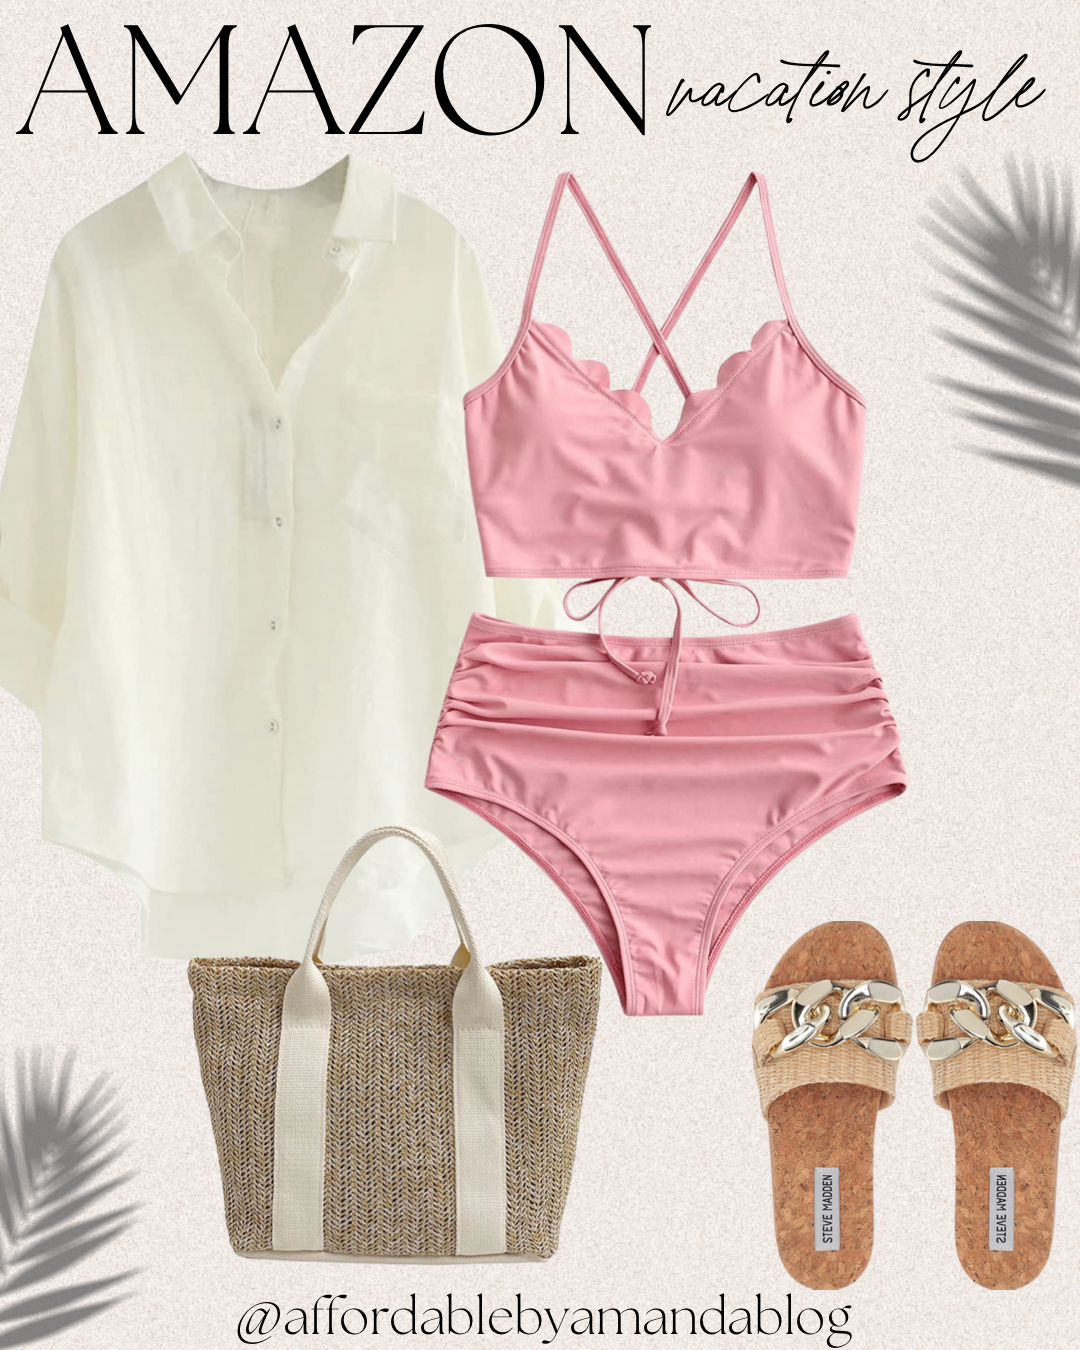 White beach cover up, pink scalloped bikini, woven wicker sandals, Amazon vacation outfit idea